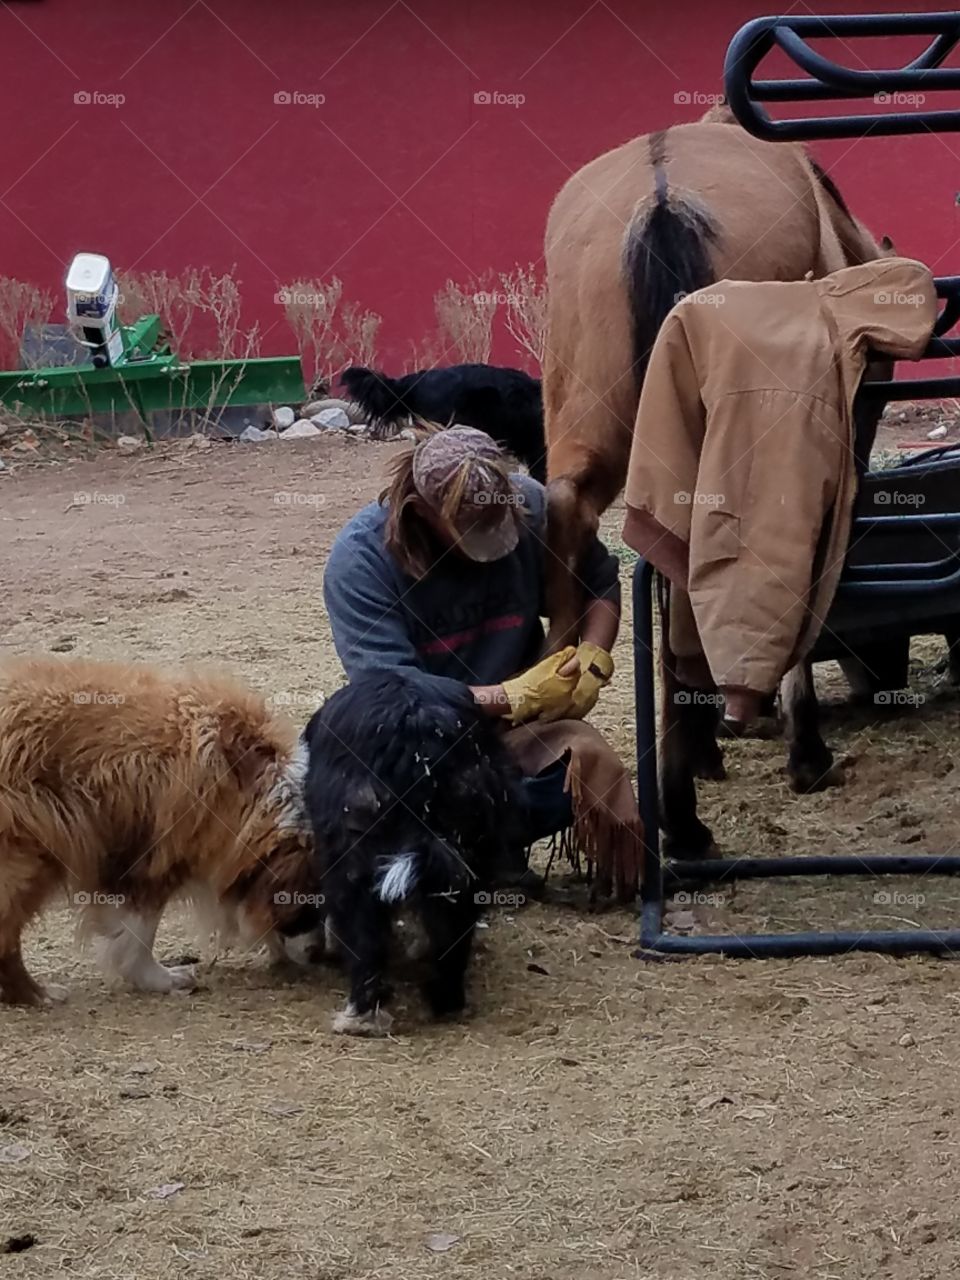 Working with horses around dogs